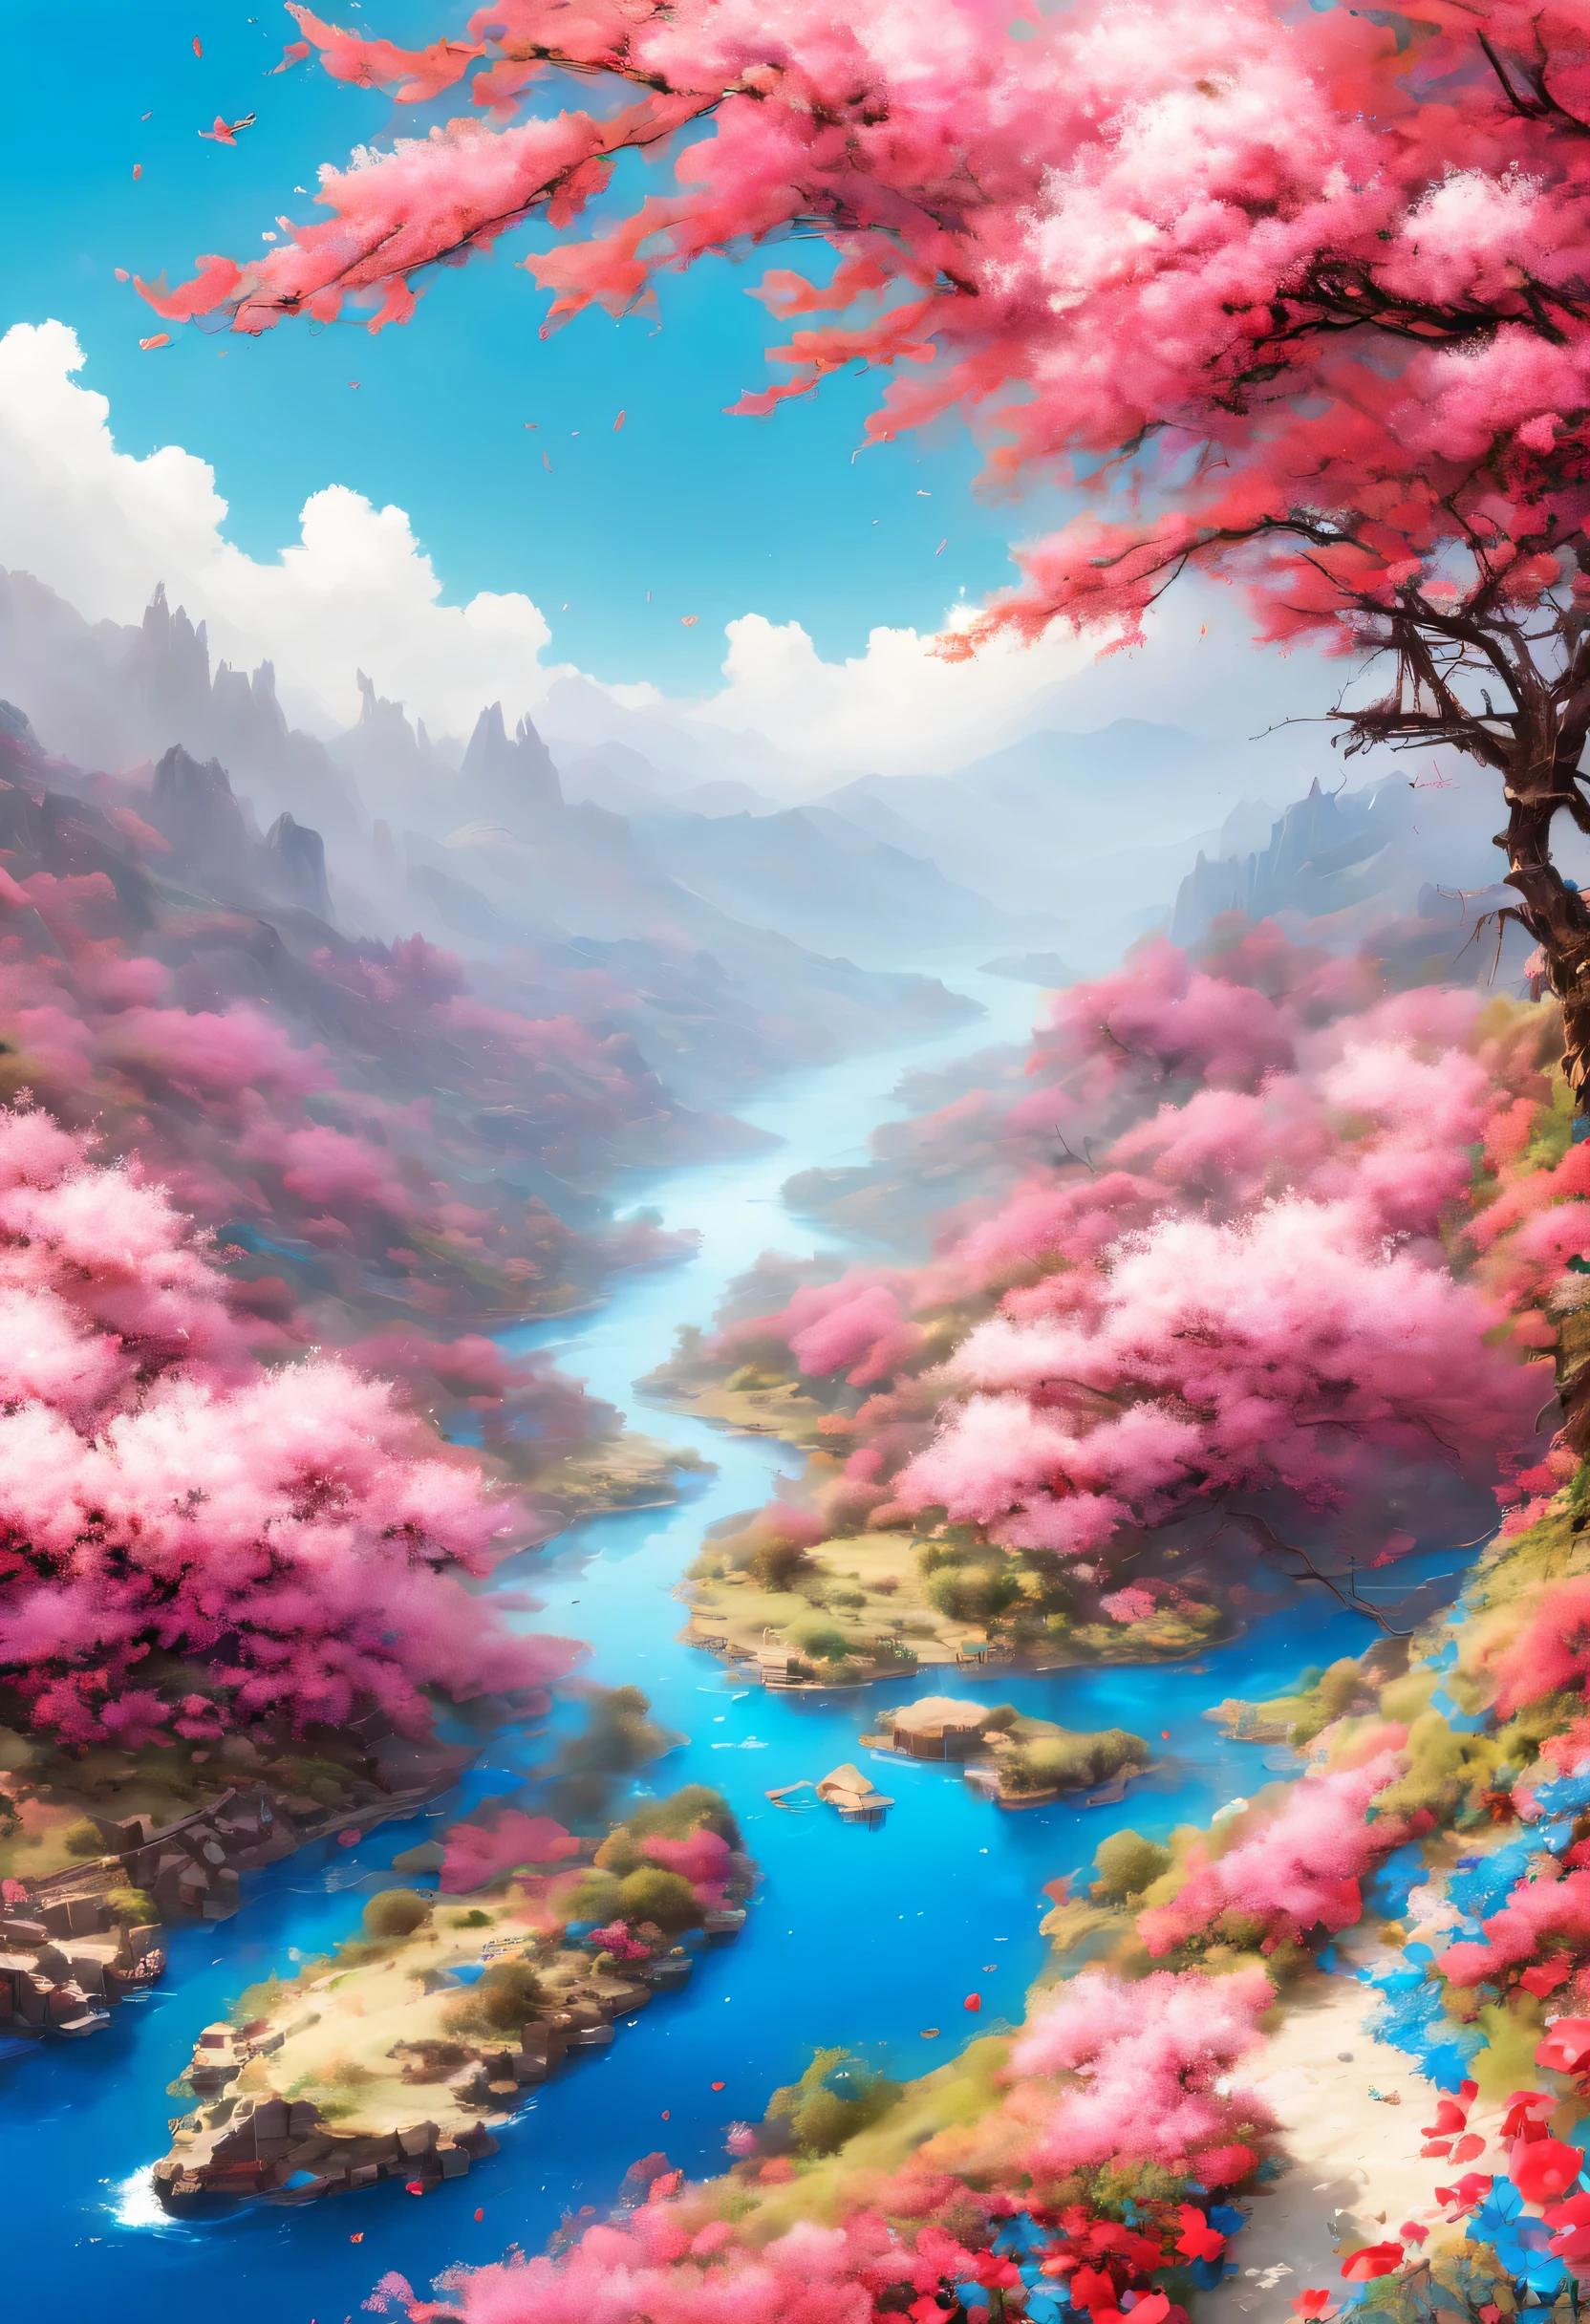 The wide drop-shaped river channel is surrounded by dense rose petals, blue lake, National Geographic photography style, Exaggerated visual composition and color, Bird&#39;s eye perspective photography, Pioneering color photography, complex weave, photography, Vibrant and exaggerated scenery,